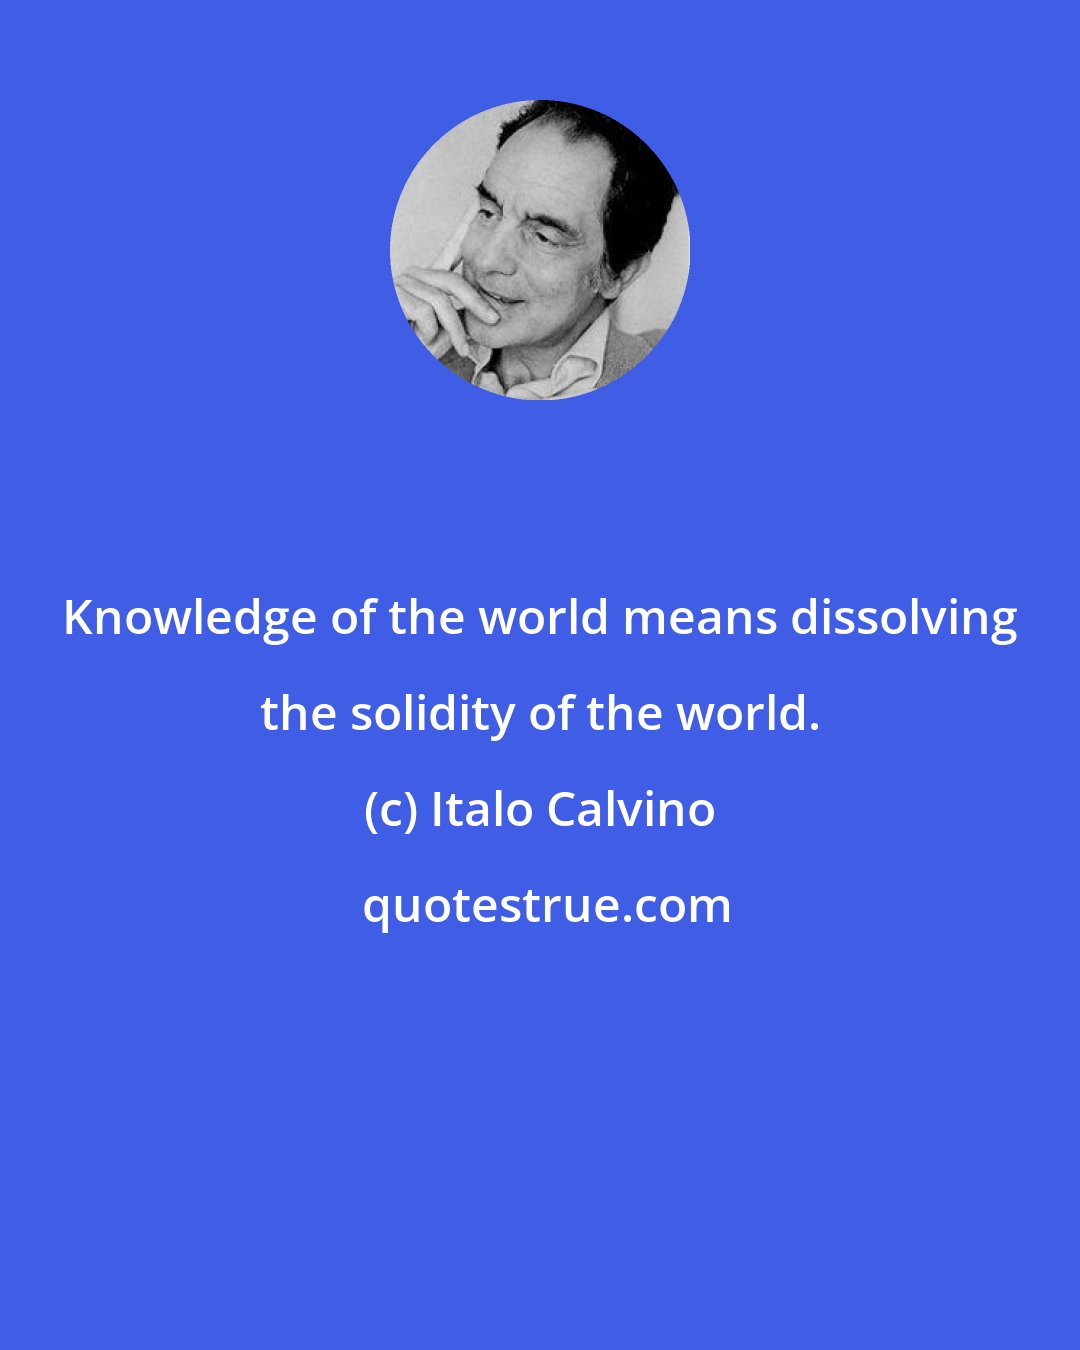 Italo Calvino: Knowledge of the world means dissolving the solidity of the world.